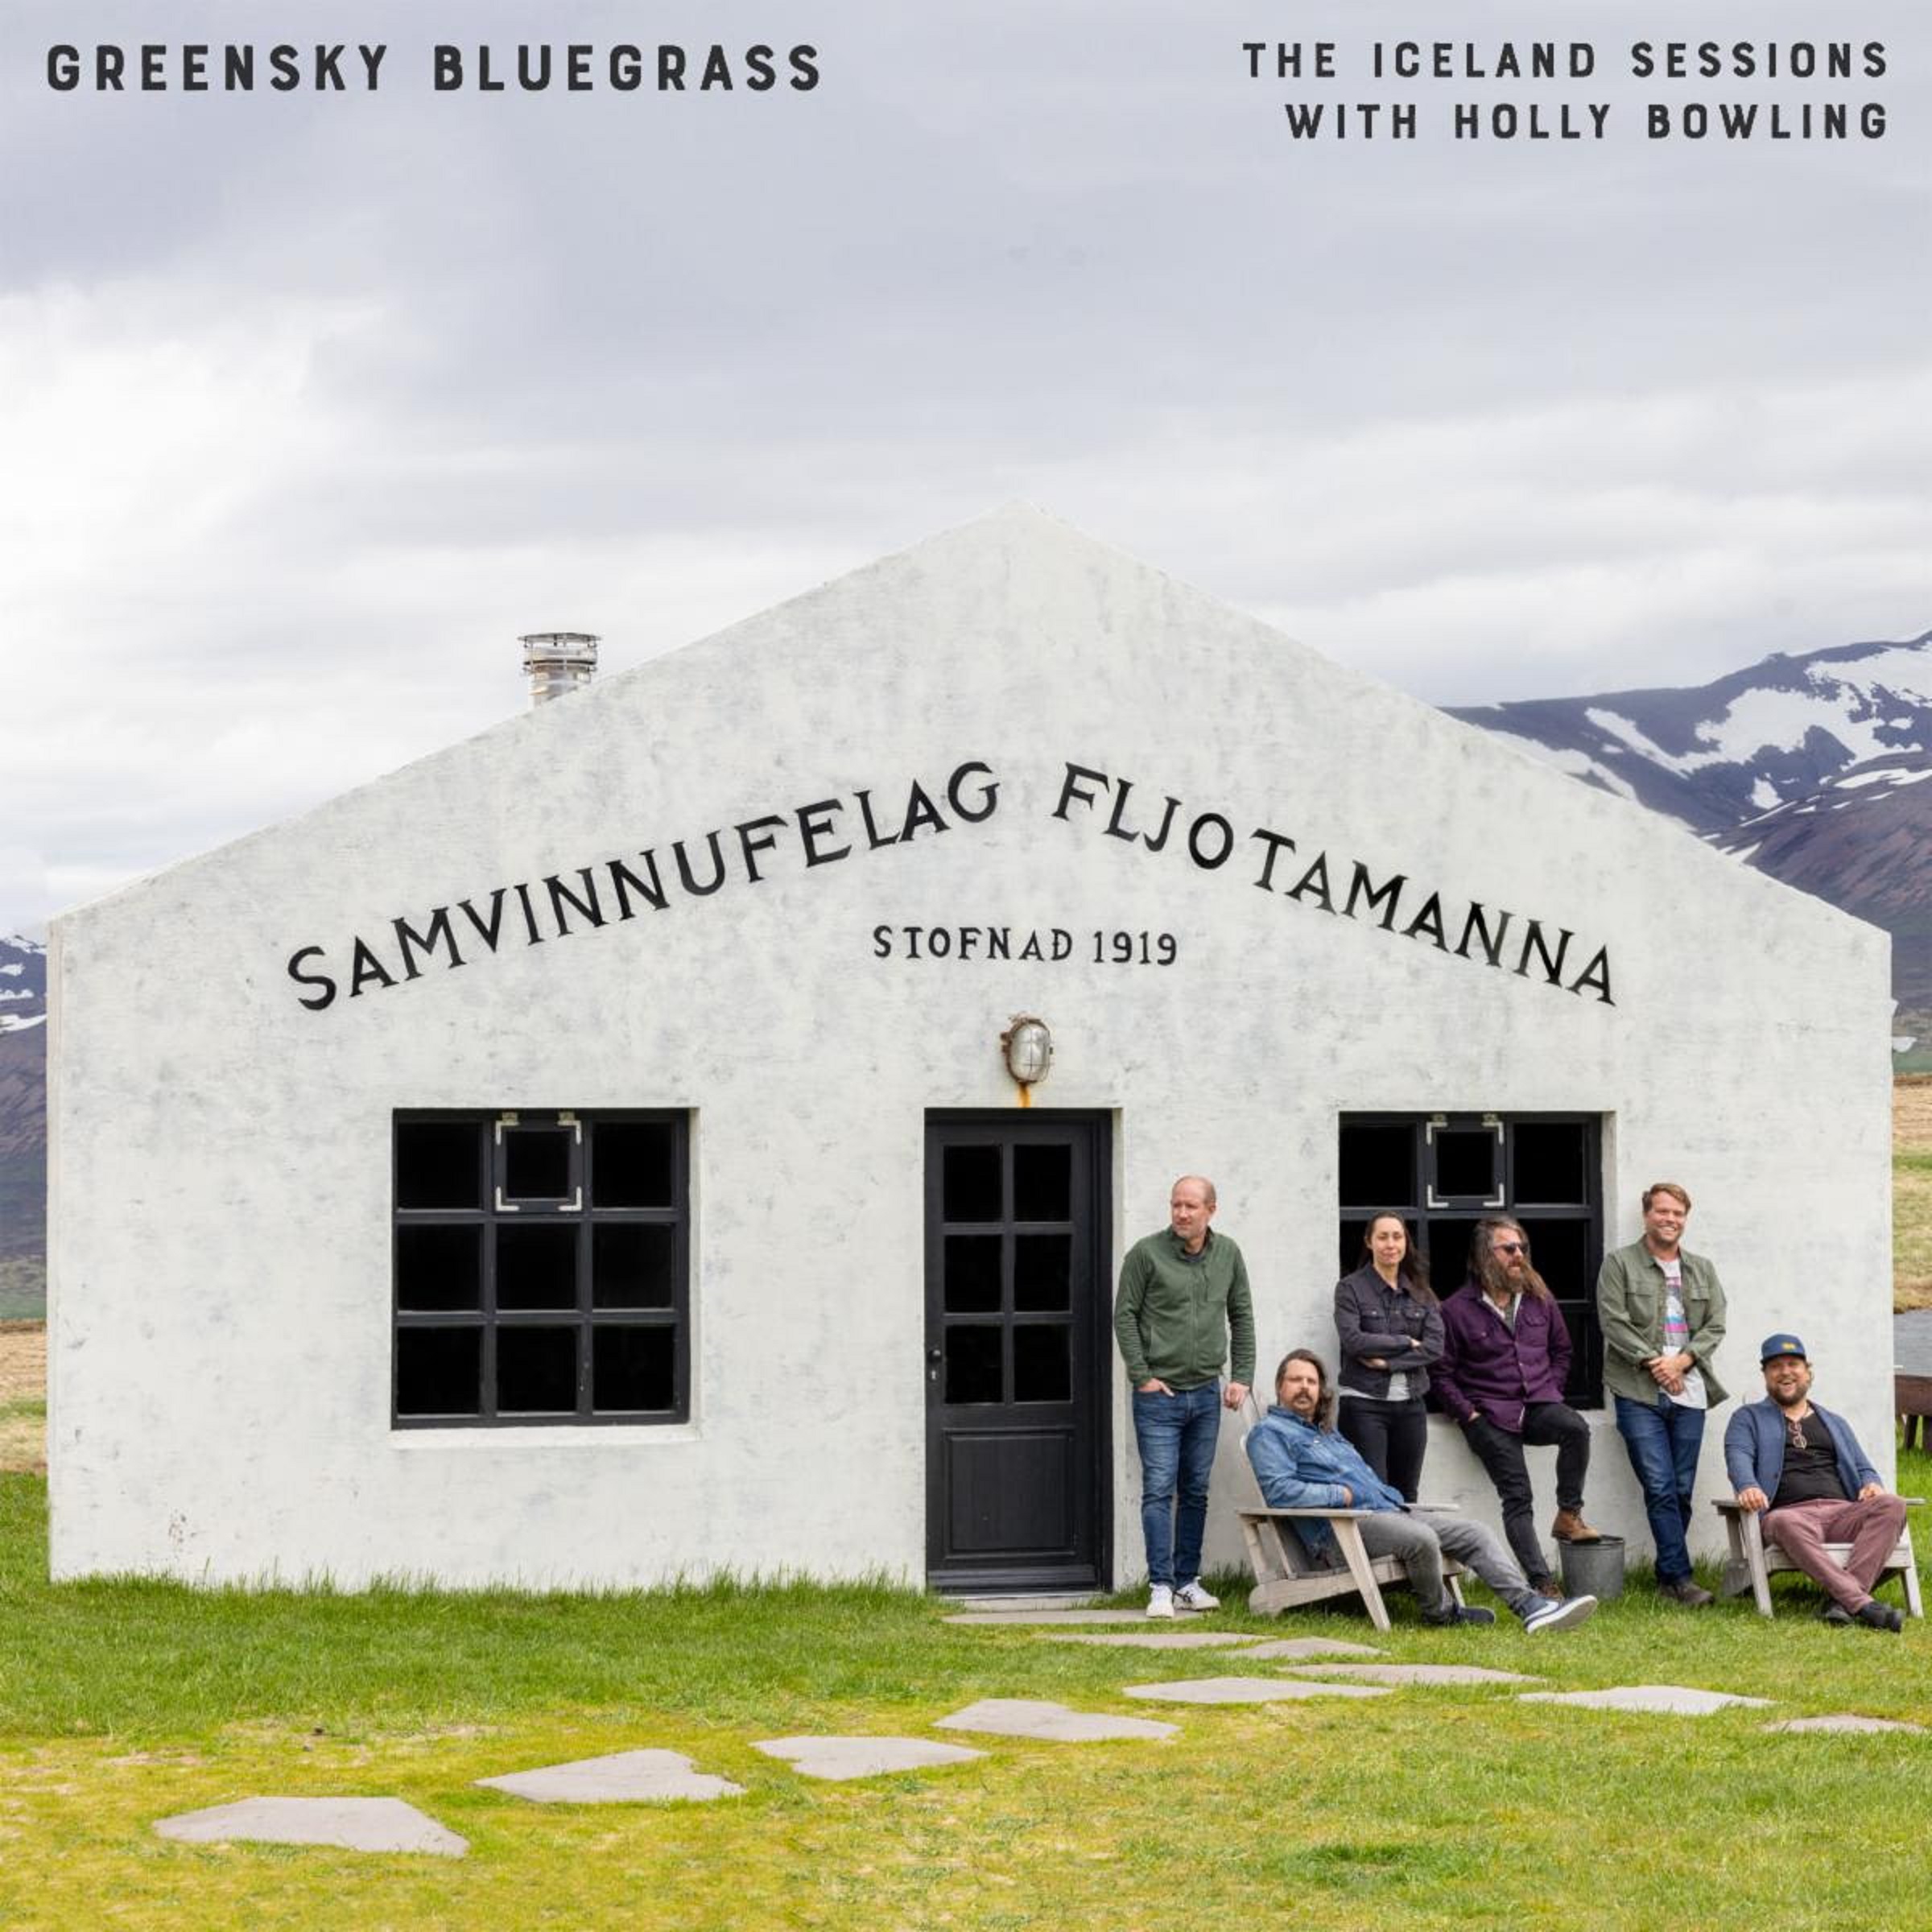 Greensky Bluegrass release The Iceland Sessions ft. Holly Bowling; summer tour kicks off June 6